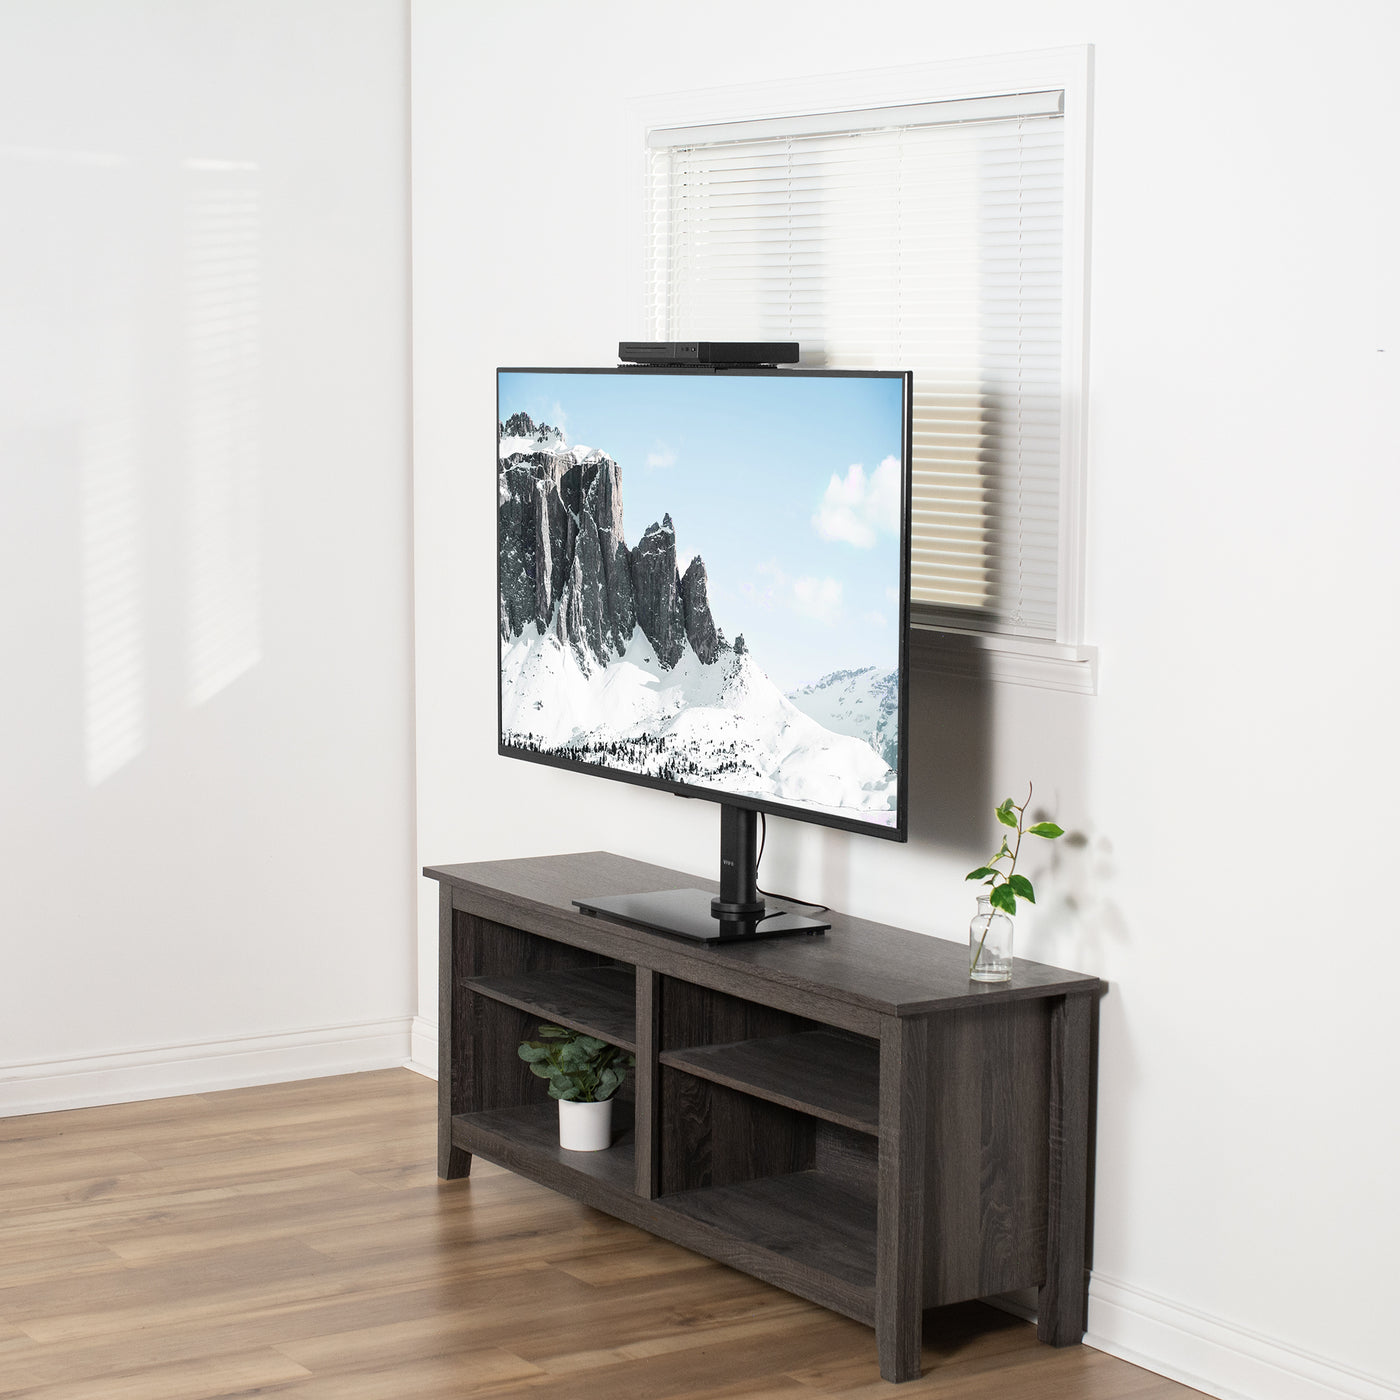 TV top shelf elevating a streaming device to a convenient height.